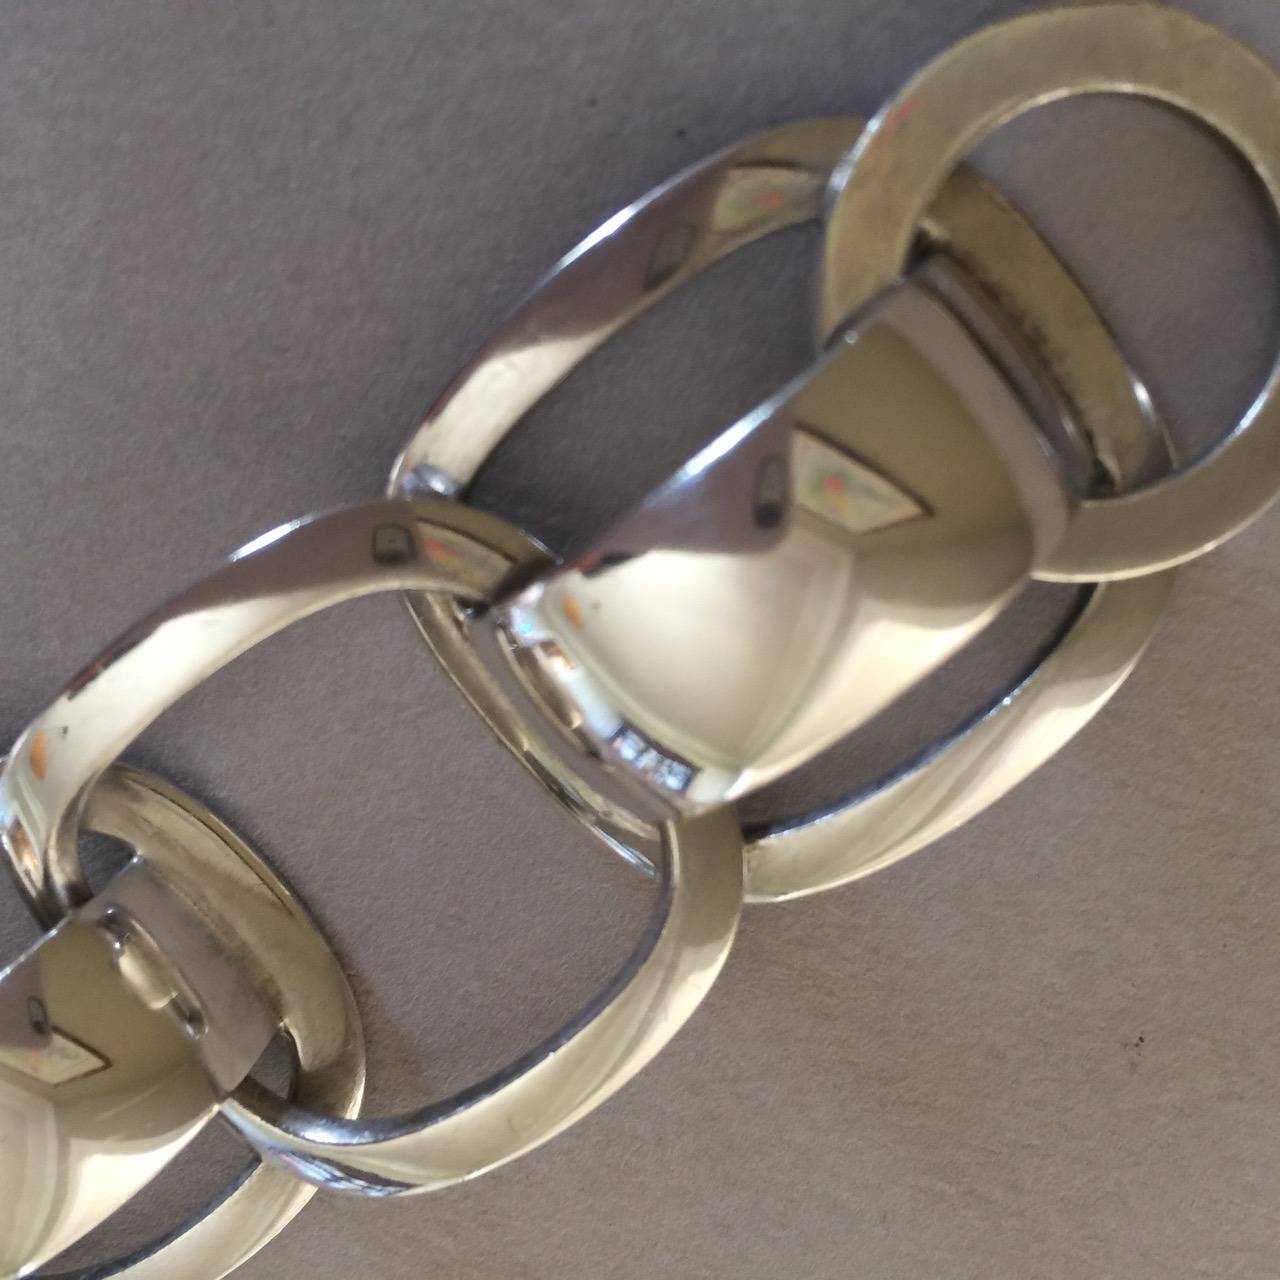 Georg Jensen Modernist Bracelet No. 192a by Ibe Dahlquist In Good Condition For Sale In San Francisco, CA